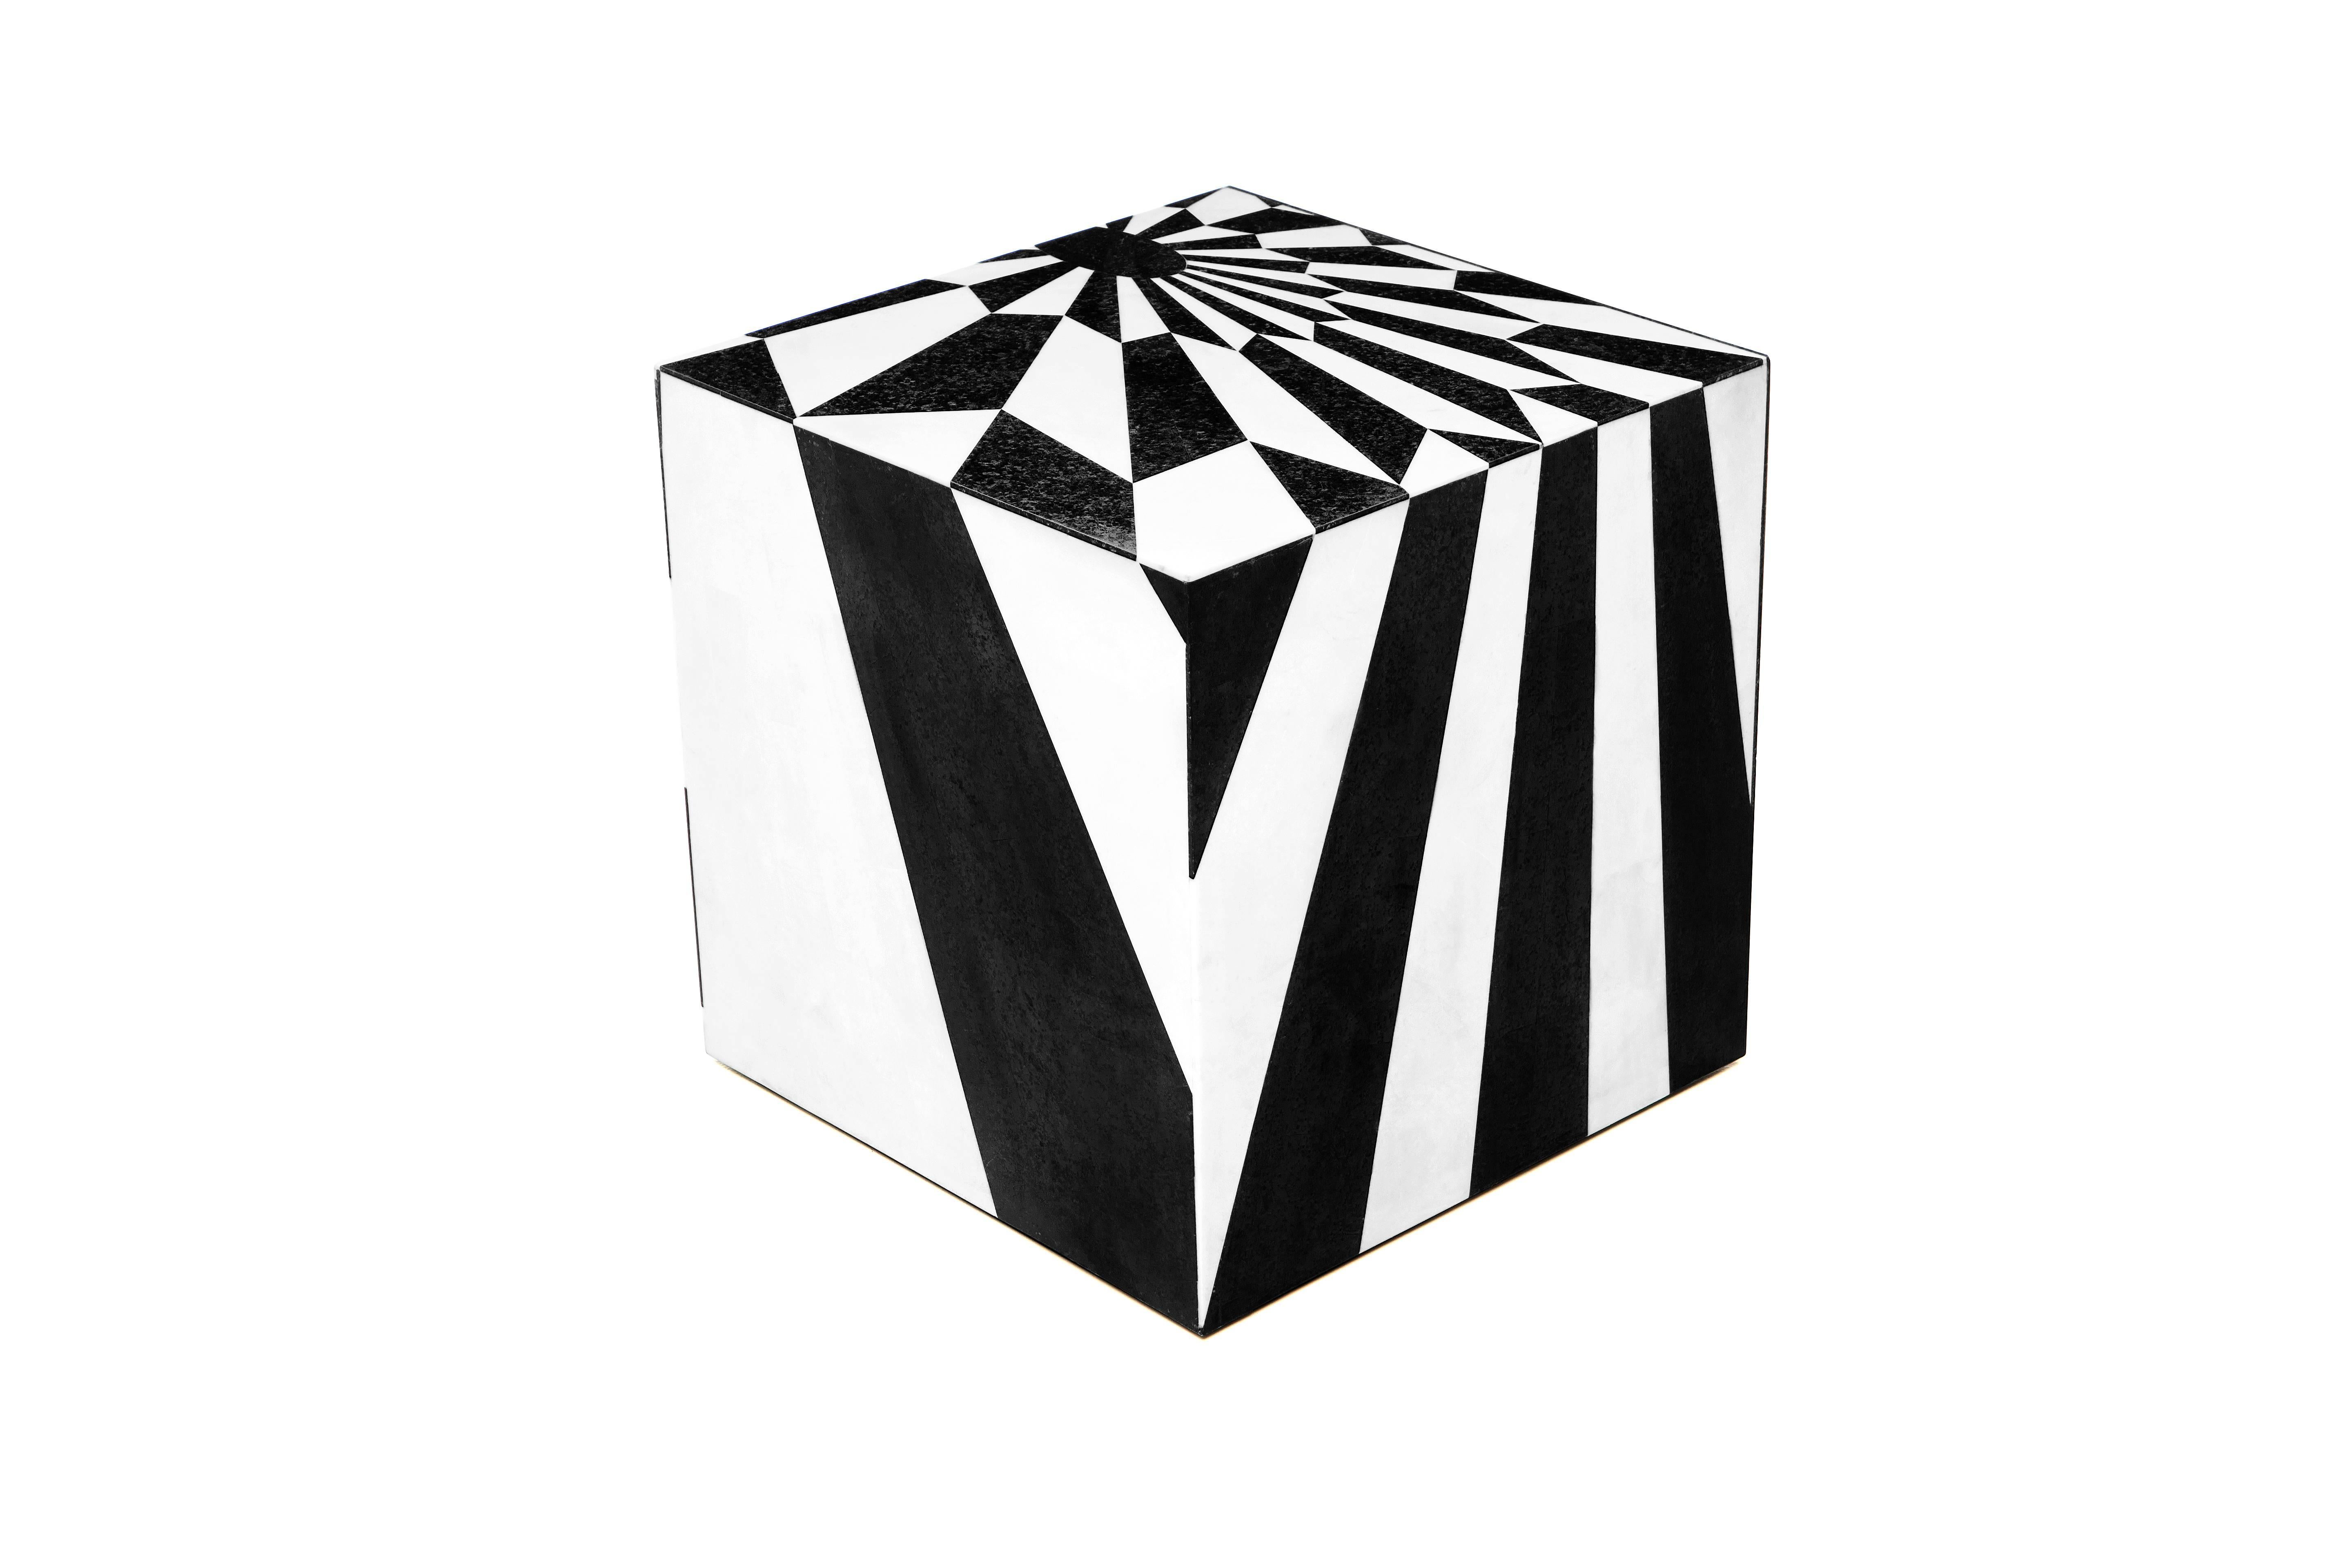 The tectonic silence cube, an unusual and dynamic piece of furniture, is covered in magnificent marble marquetry trompe-l’oeil design geometric pattern resulting in a fascinating illusion of depth. This noble technique consists of hand-cutting